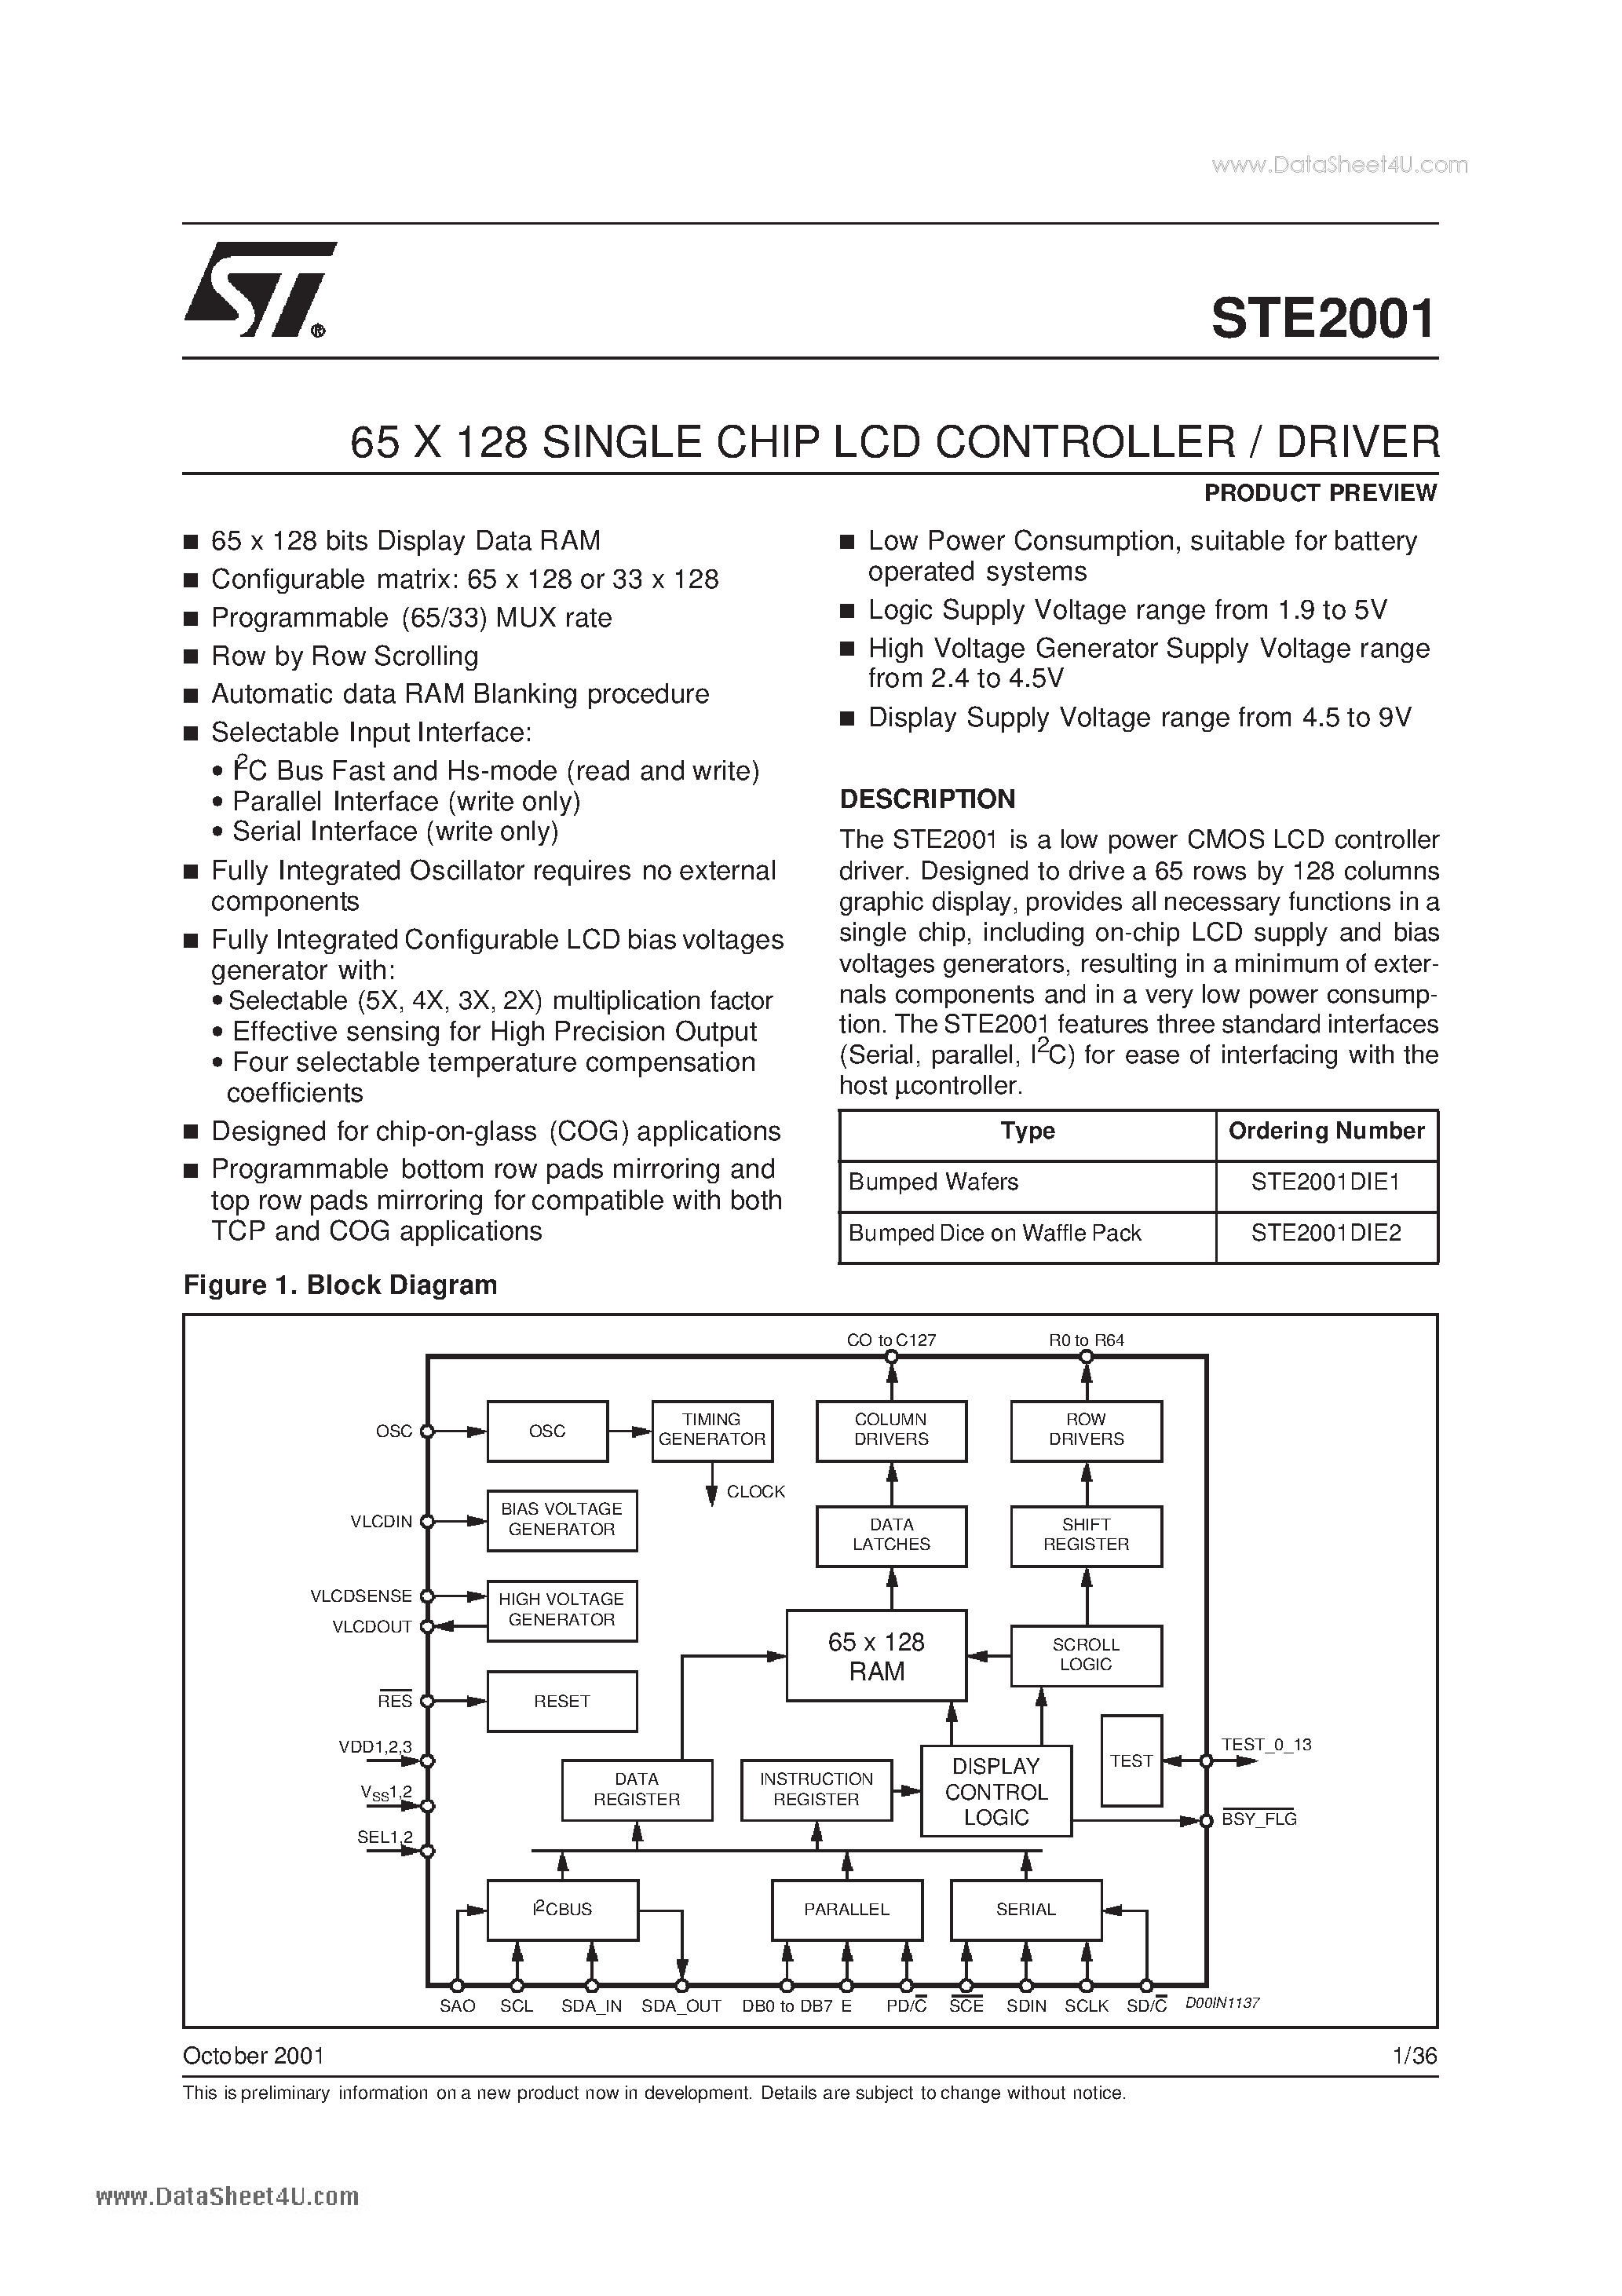 Datasheet STE2001 - 65 X 128 SINGLE CHIP LCD CONTROLLER / DRIVER page 1